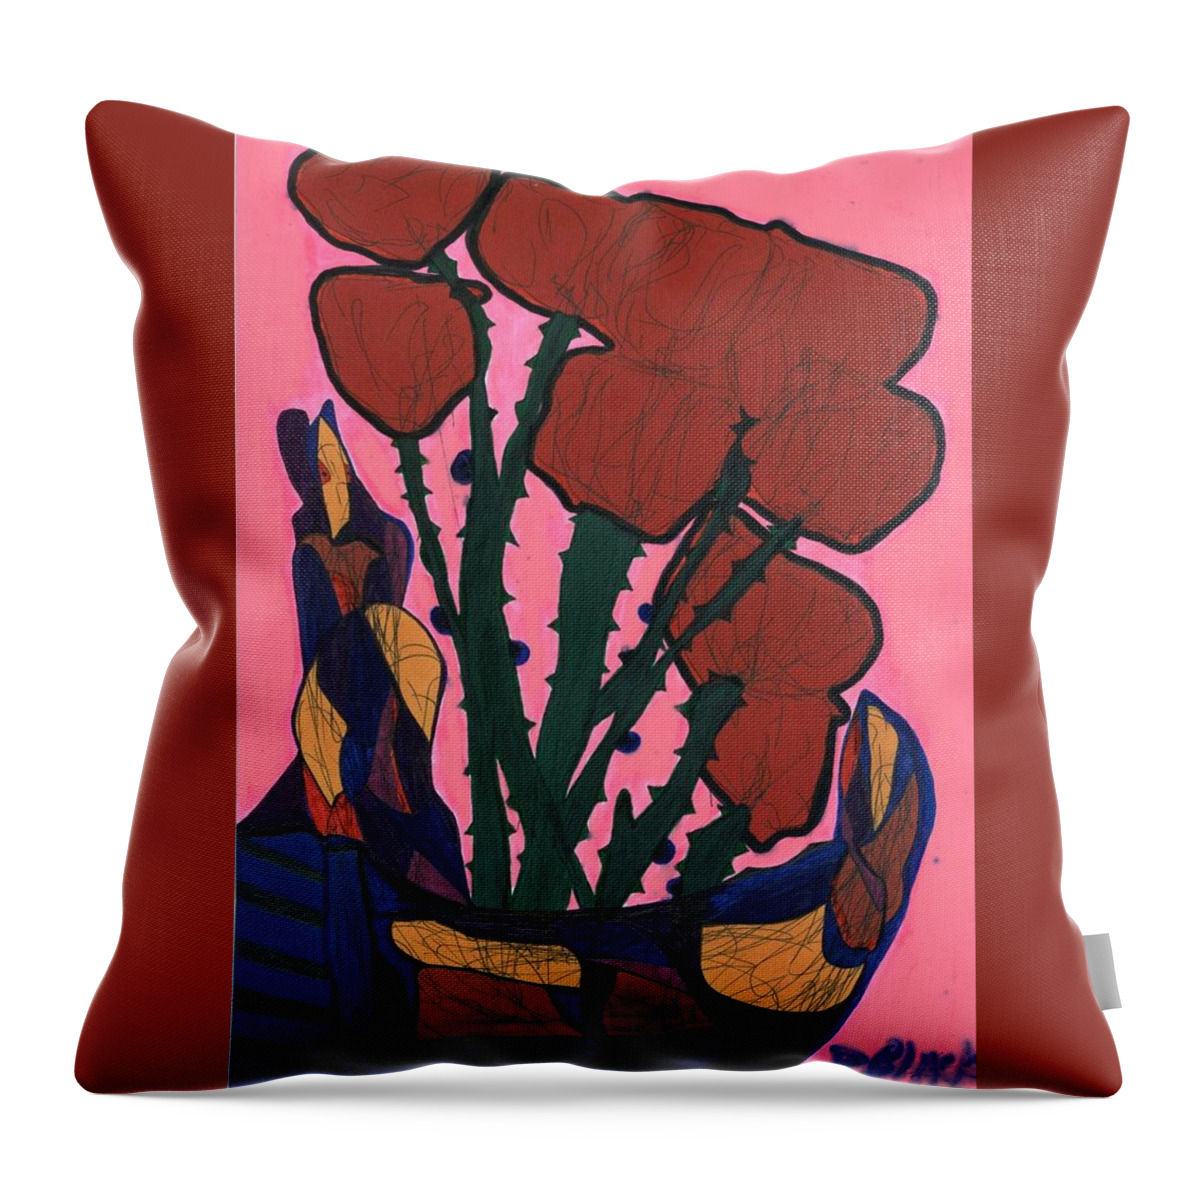 Multicultural Nfprsa Product Review Reviews Marco Social Media Technology Websites \\\\in-d�lj\\\\ Darrell Black Definism Artwork Throw Pillow featuring the drawing Rosebed by Darrell Black